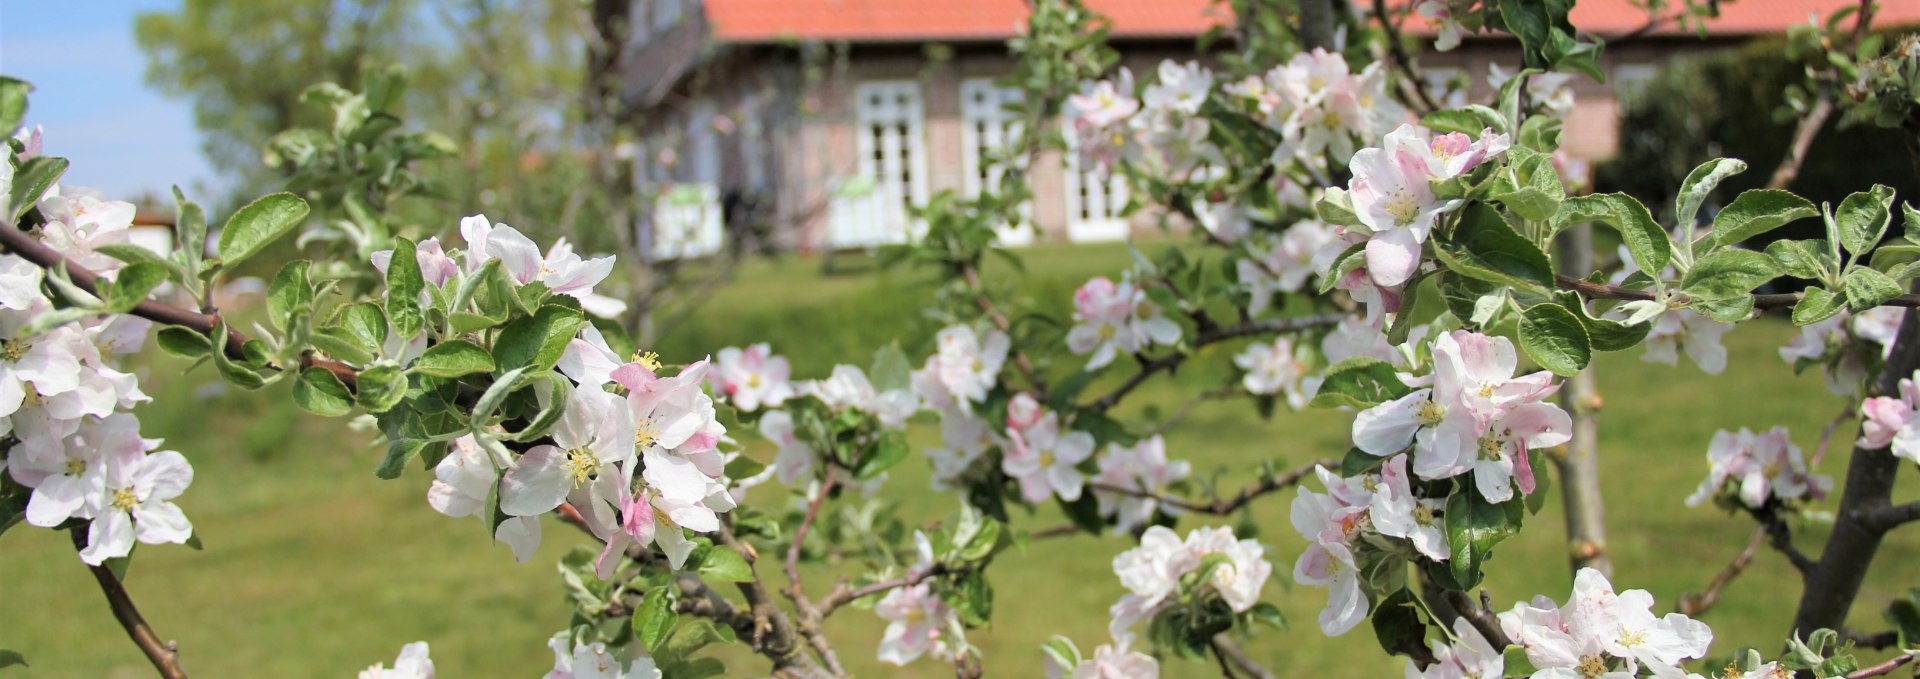 Apple blossom in our orchard, © Brigitte Leberl